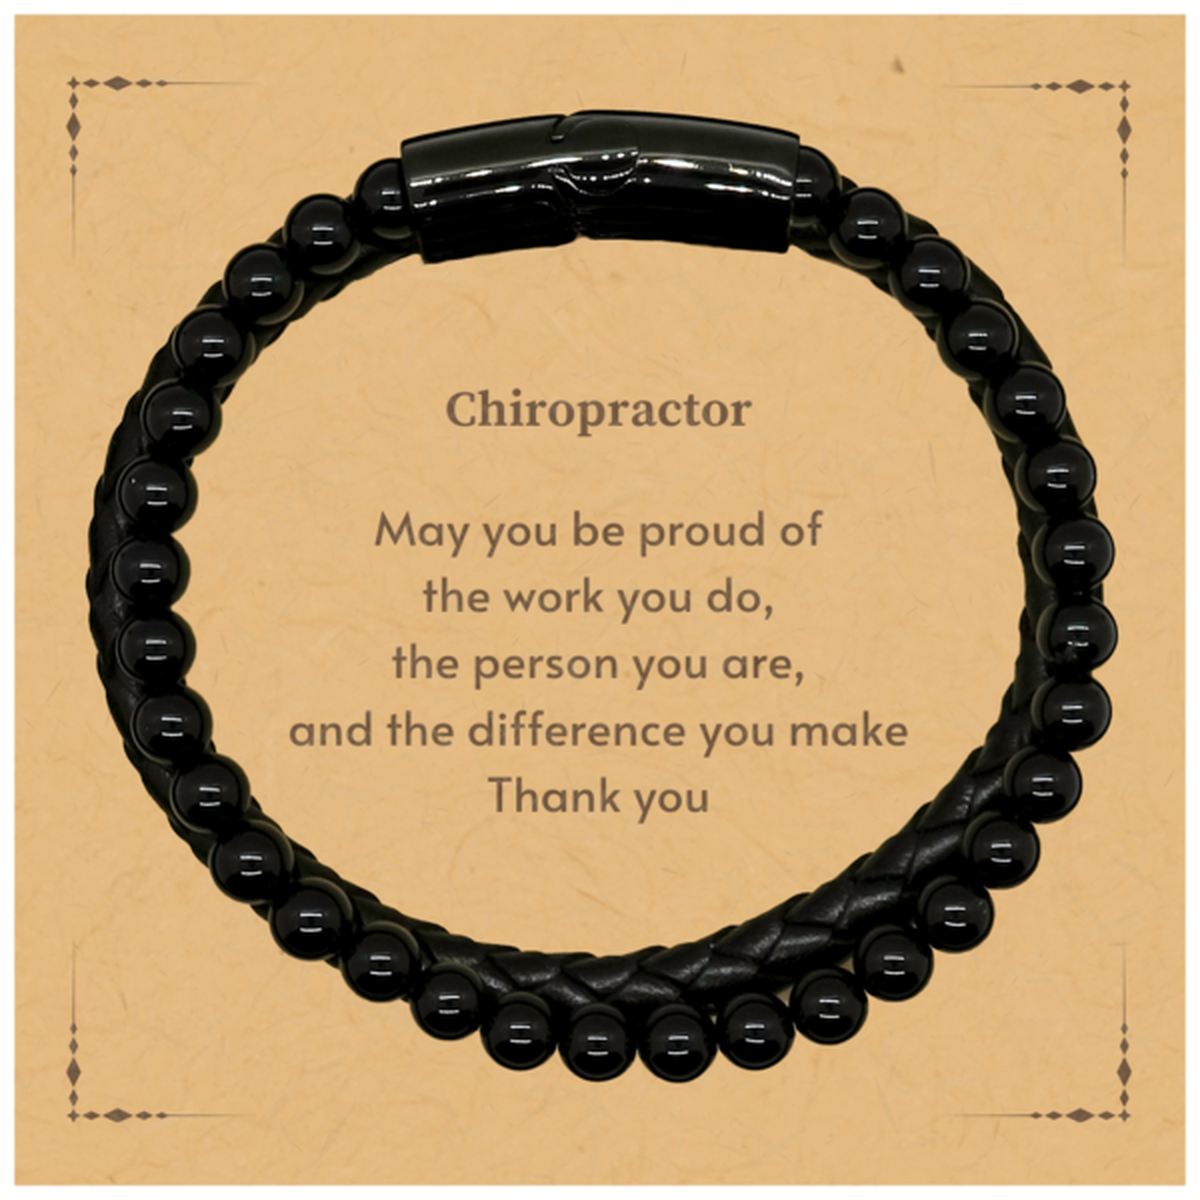 Heartwarming Stone Leather Bracelets Retirement Coworkers Gifts for Chiropractor, Chiropractor May You be proud of the work you do, the person you are Gifts for Boss Men Women Friends